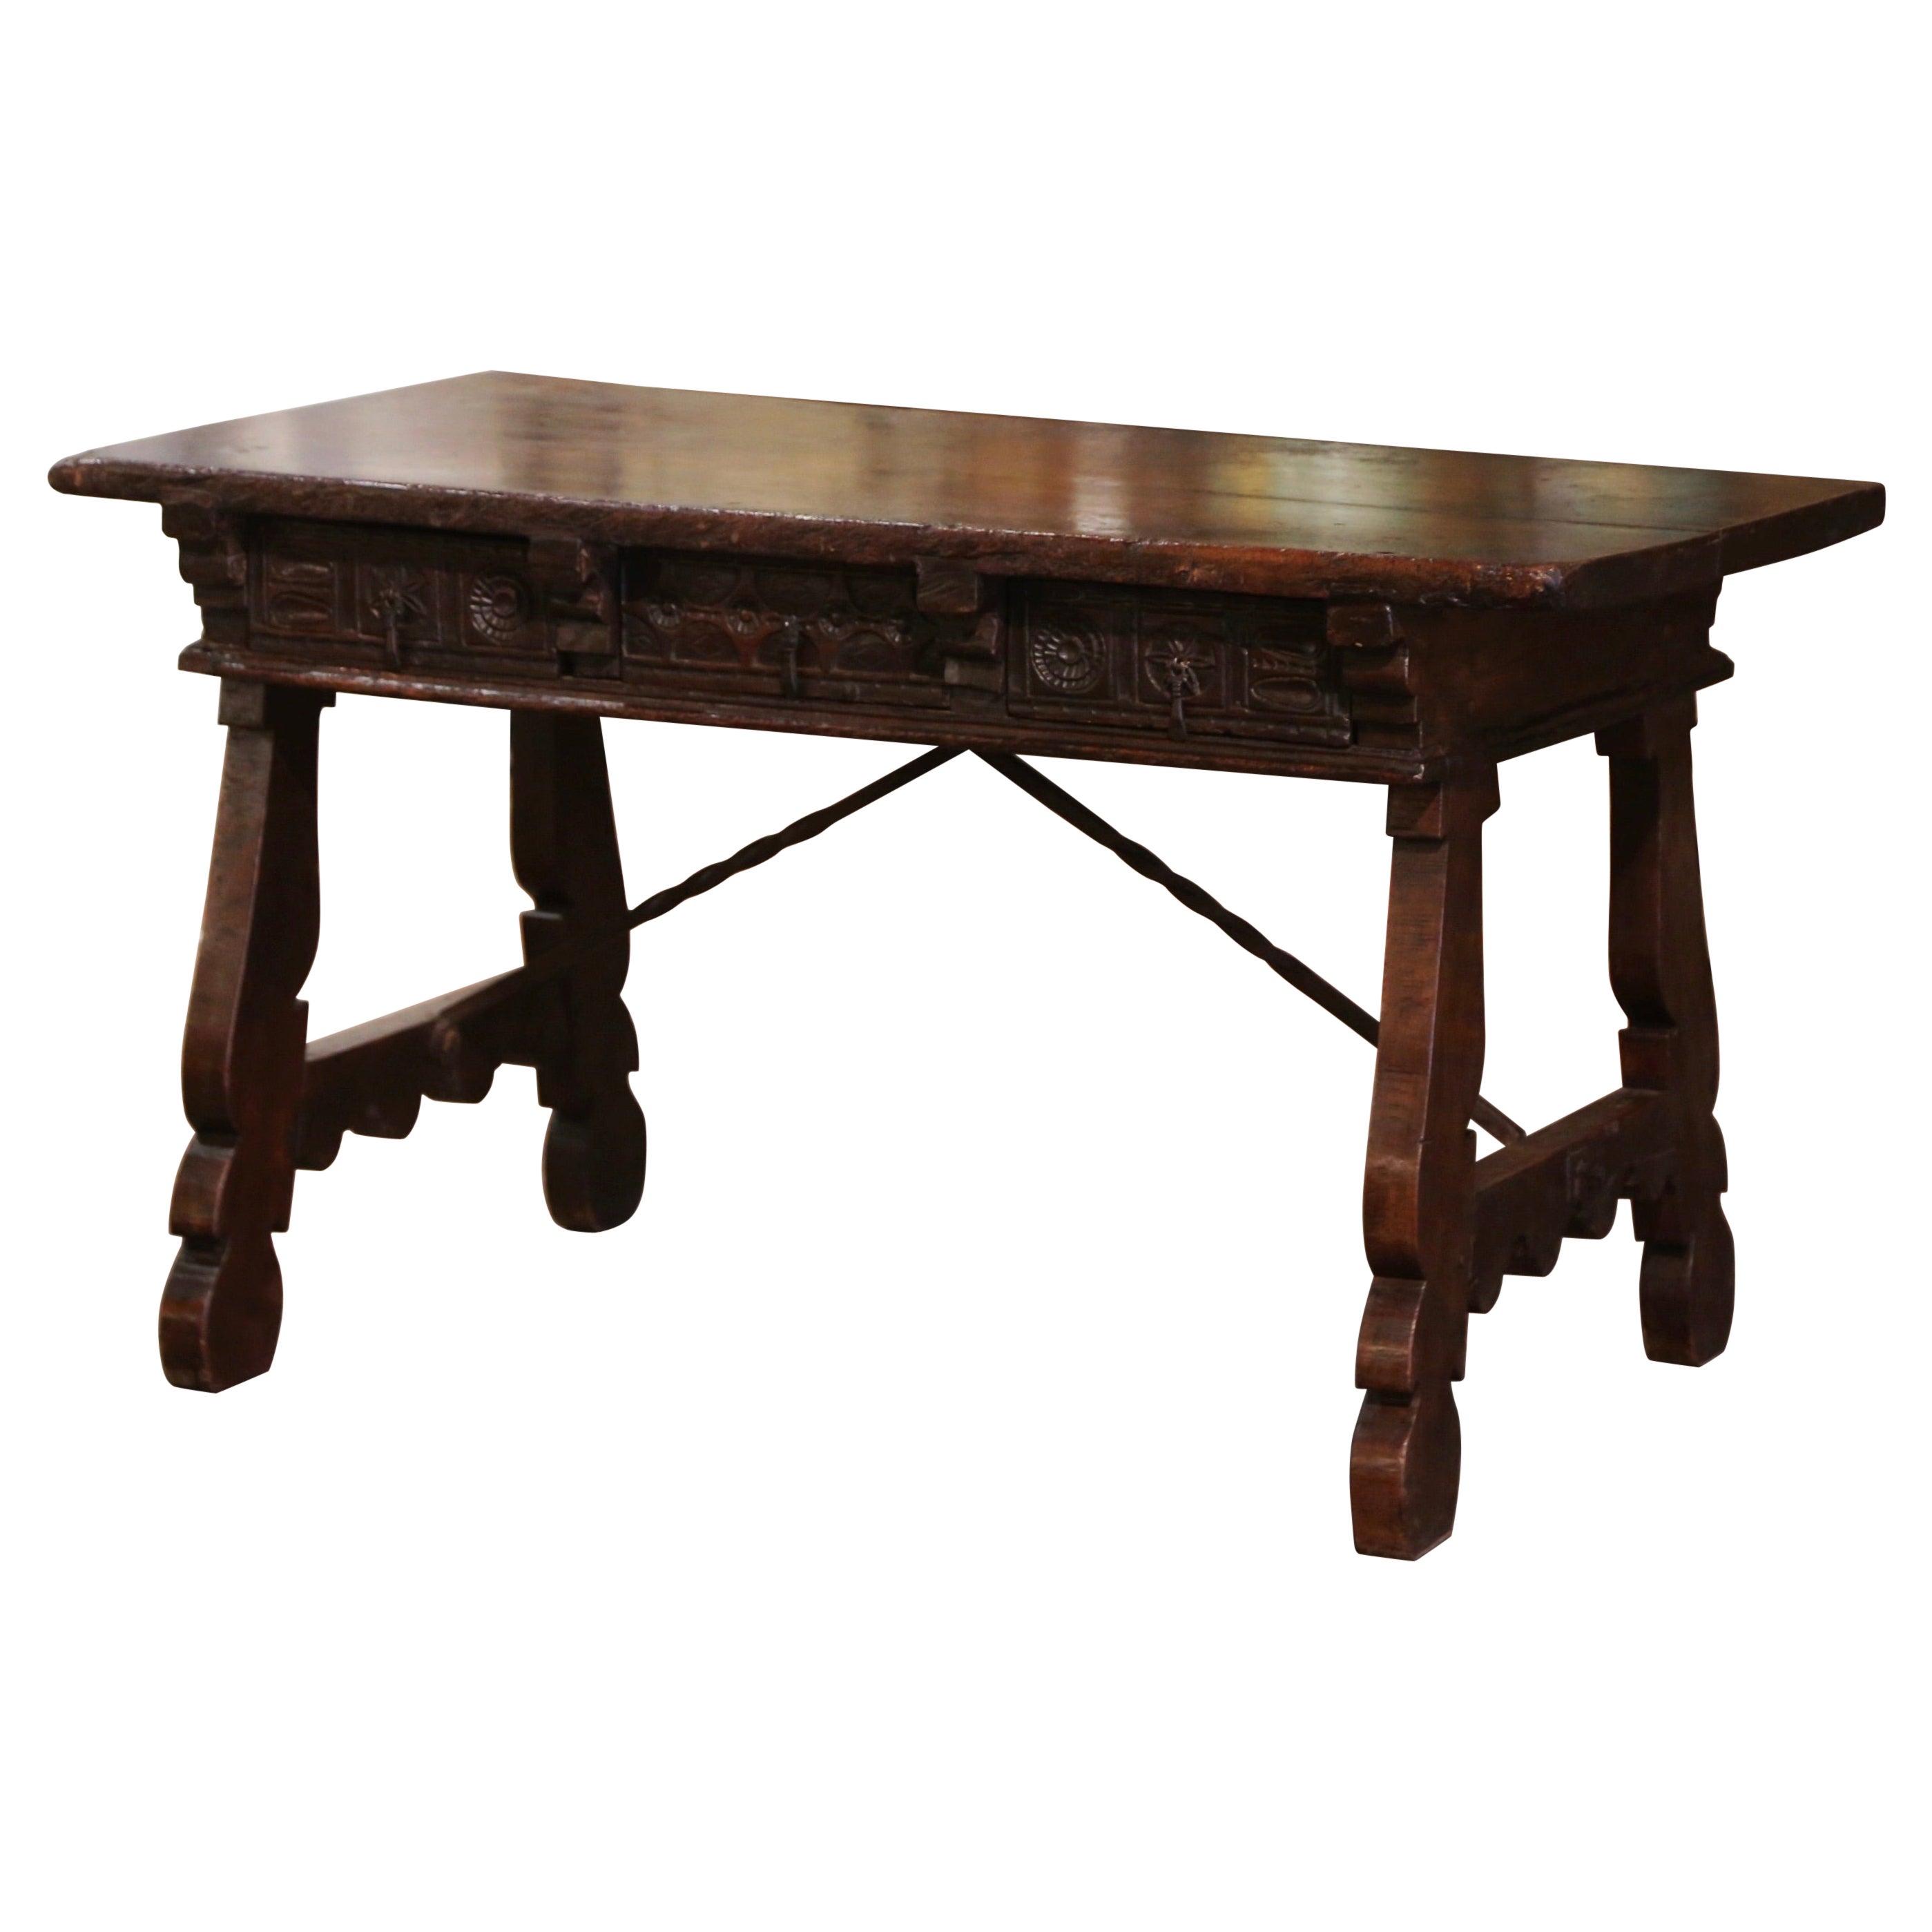 18th Century Spanish Carved Walnut Desk Writing Table with Iron Stretcher